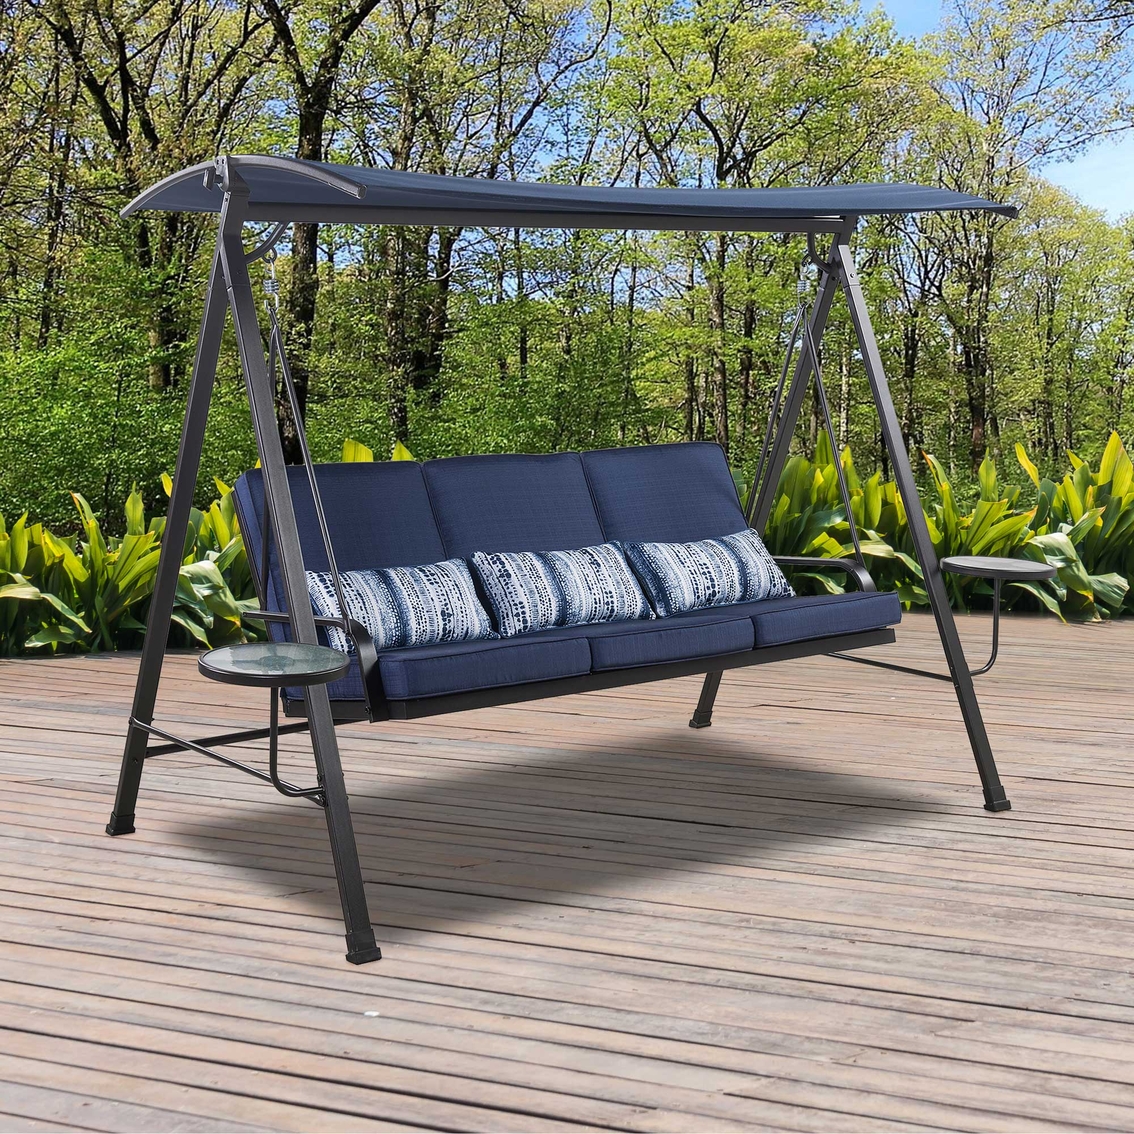 Home Creations 3-Person Cushioned Swing with Wicker Back and Two Side Tables - Image 2 of 2